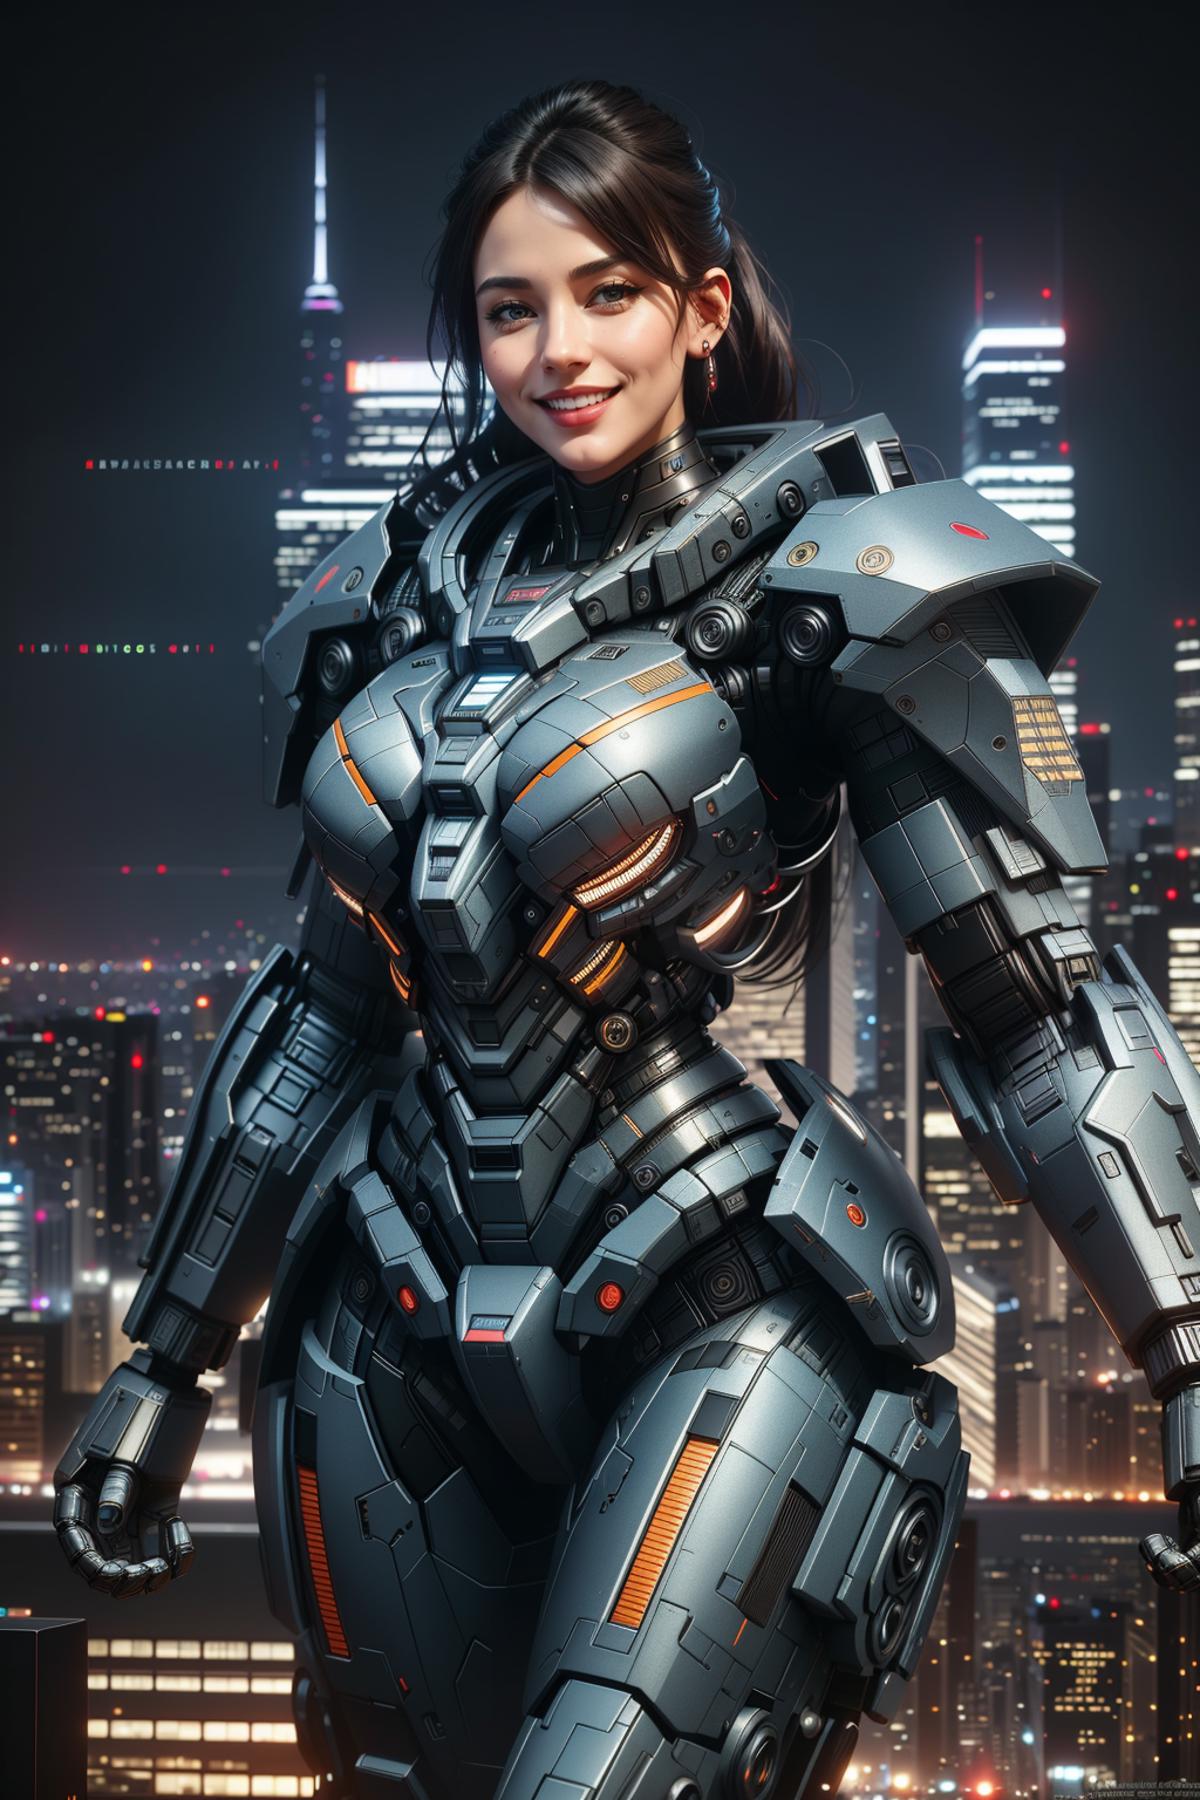 Giant Robowaifu Suit - by EDG image by EDG